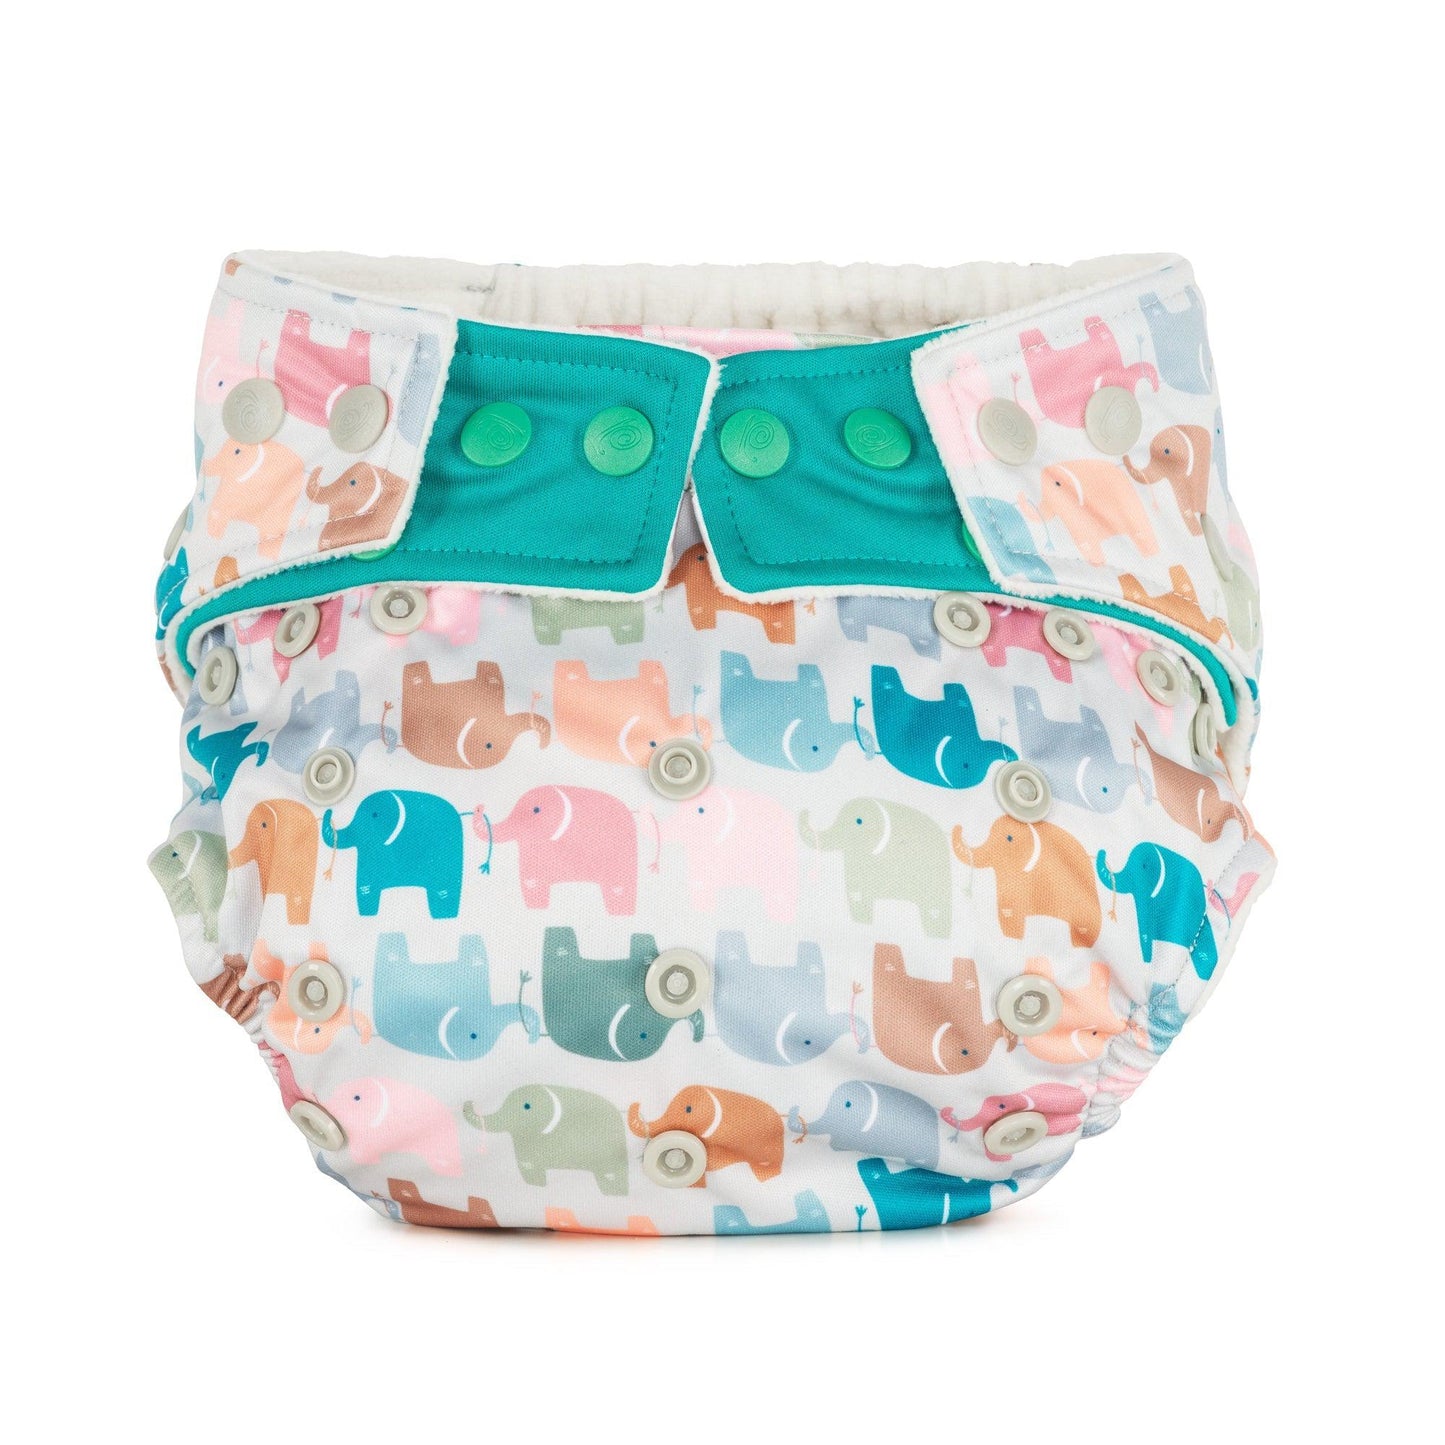 Baba + Boo Reusable Nappy Extenders - Teal-Accessories-Baba + Boo-The Nappy Market